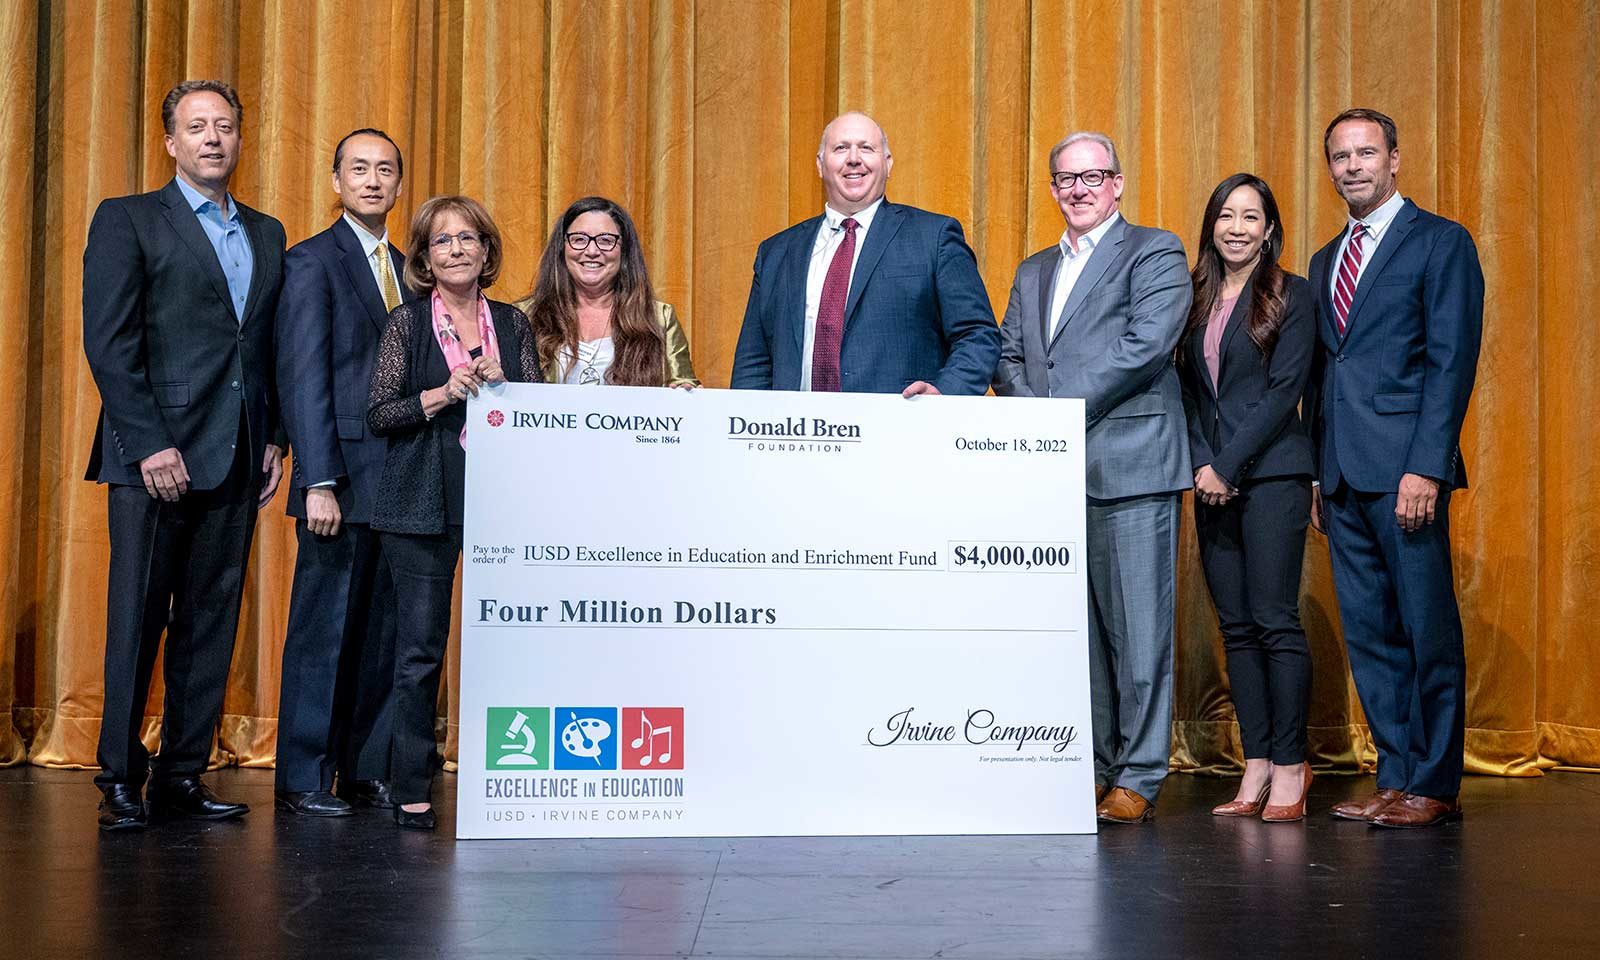 IUSD celebrates 50th anniversary with $4 million gift from Irvine Company  and Donald Bren Foundation - Irvine Standard